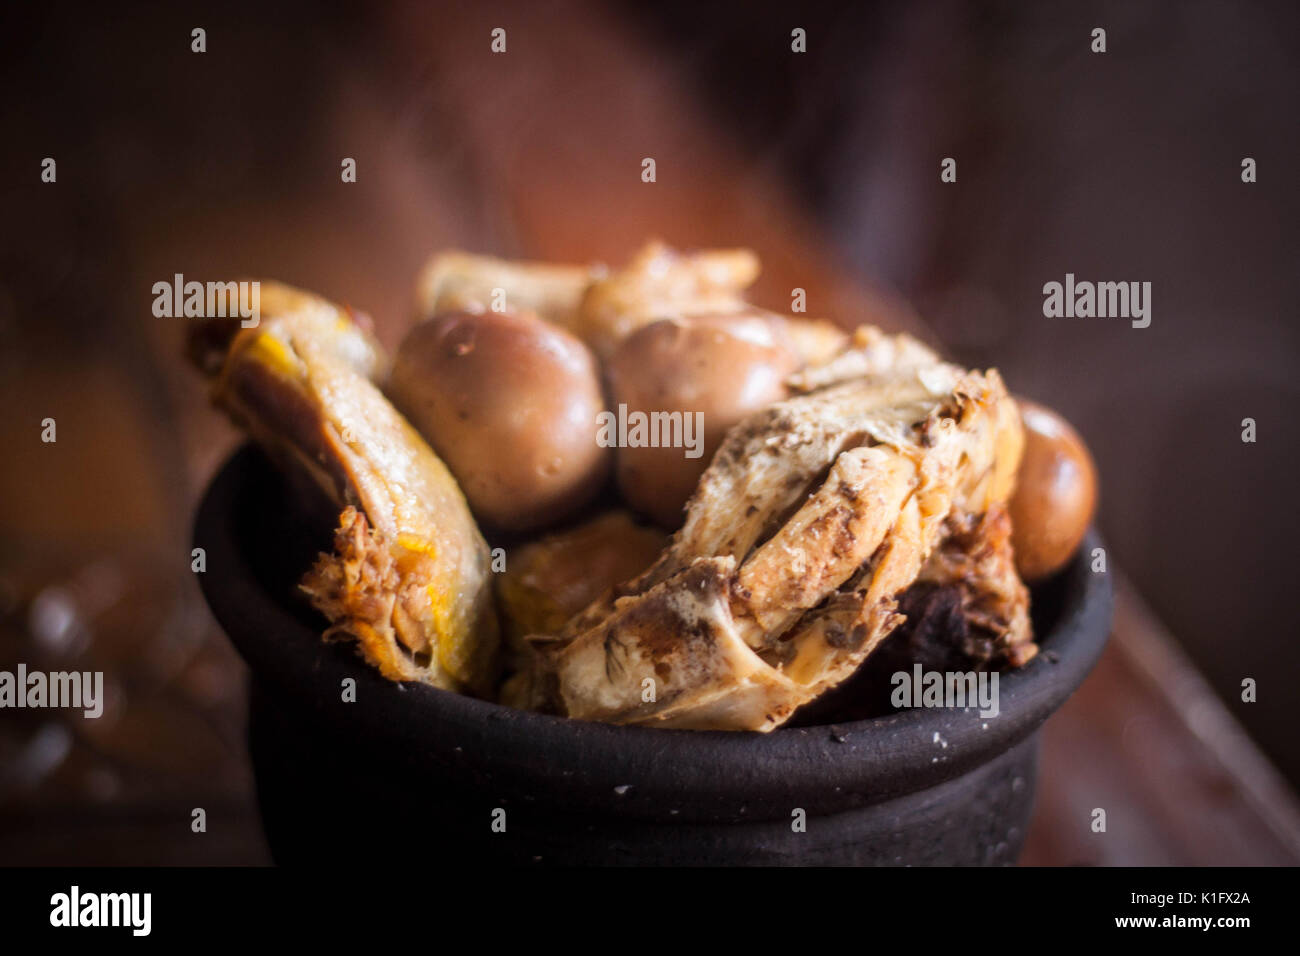 gudeg traditional exotic indonesian food with kendil and wooden table Stock Photo